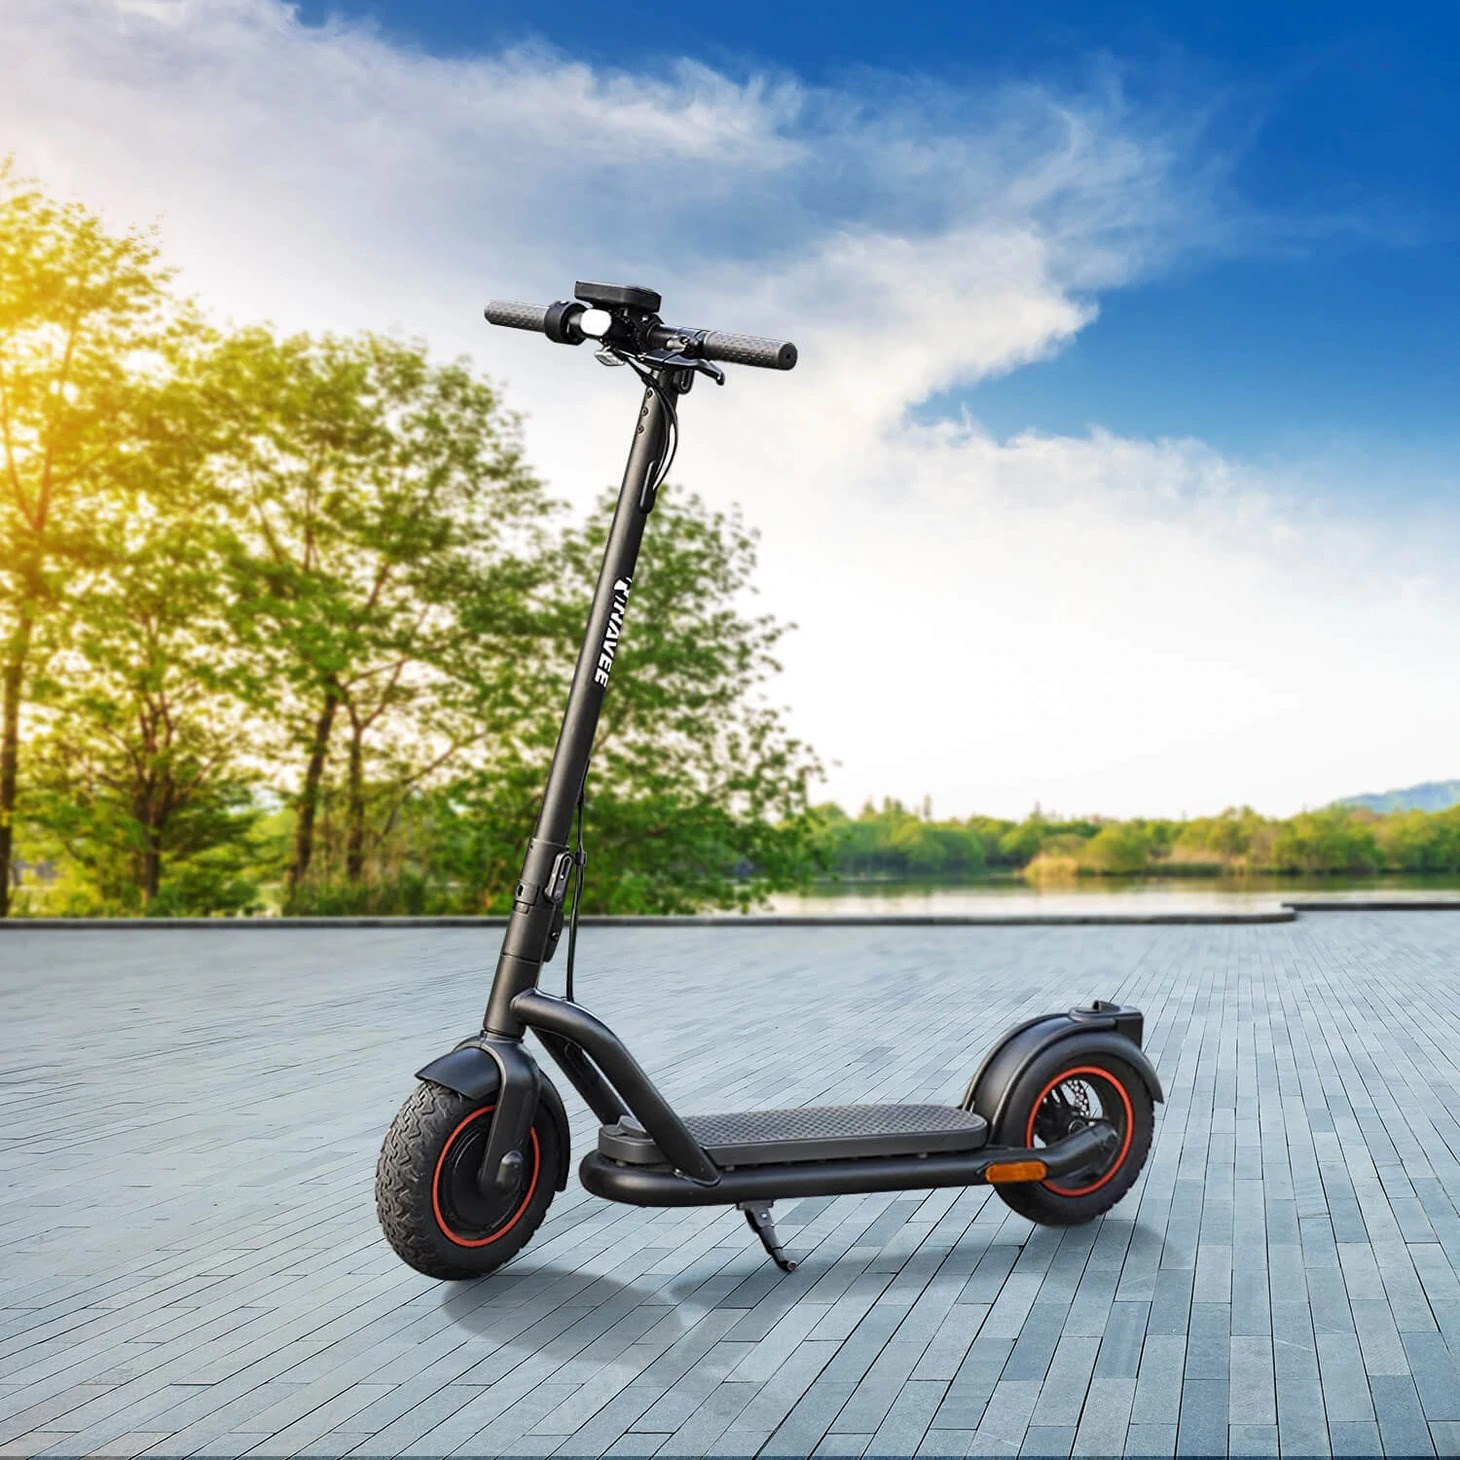 NAVEEE N65 500W scooter review